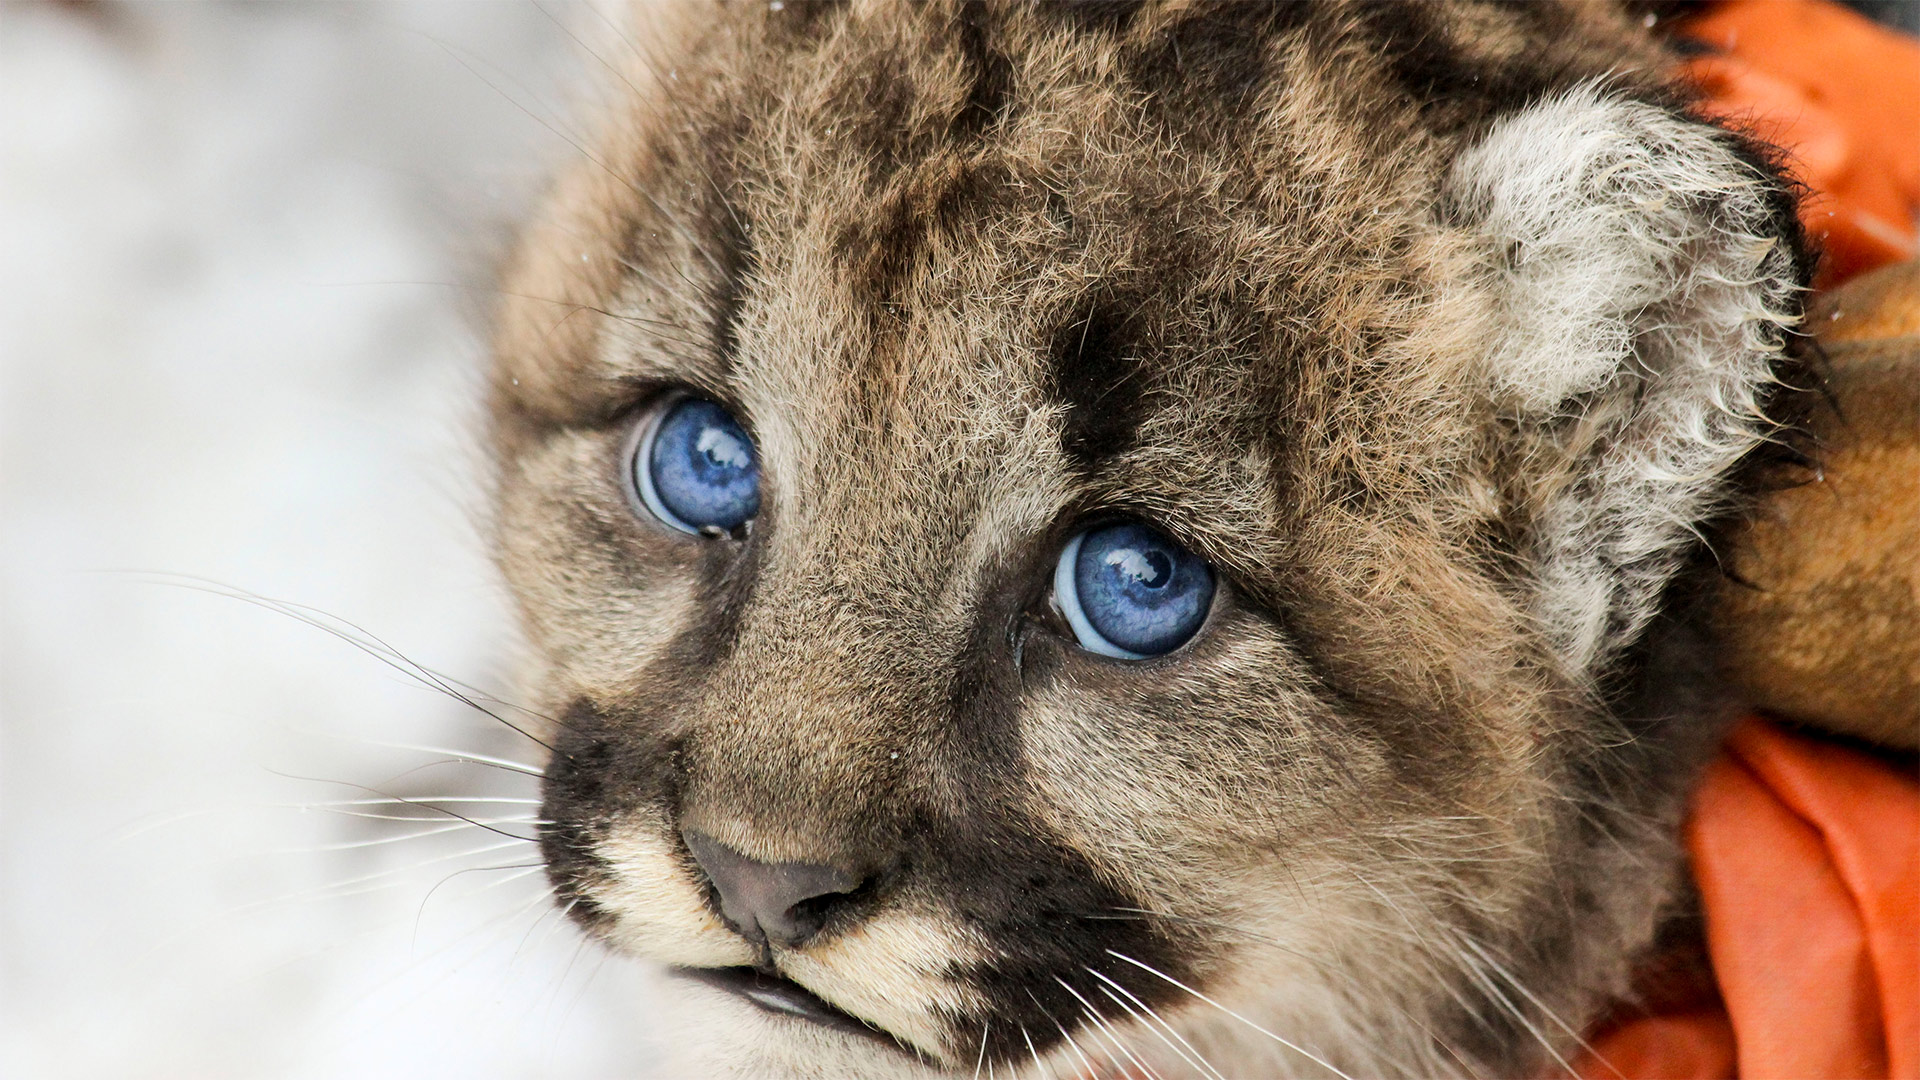 A young mountain lion cub (Puma concolor) is fitted with a GPS collar so scientists can follow its early life. Over time her striking blue eyes will darken.